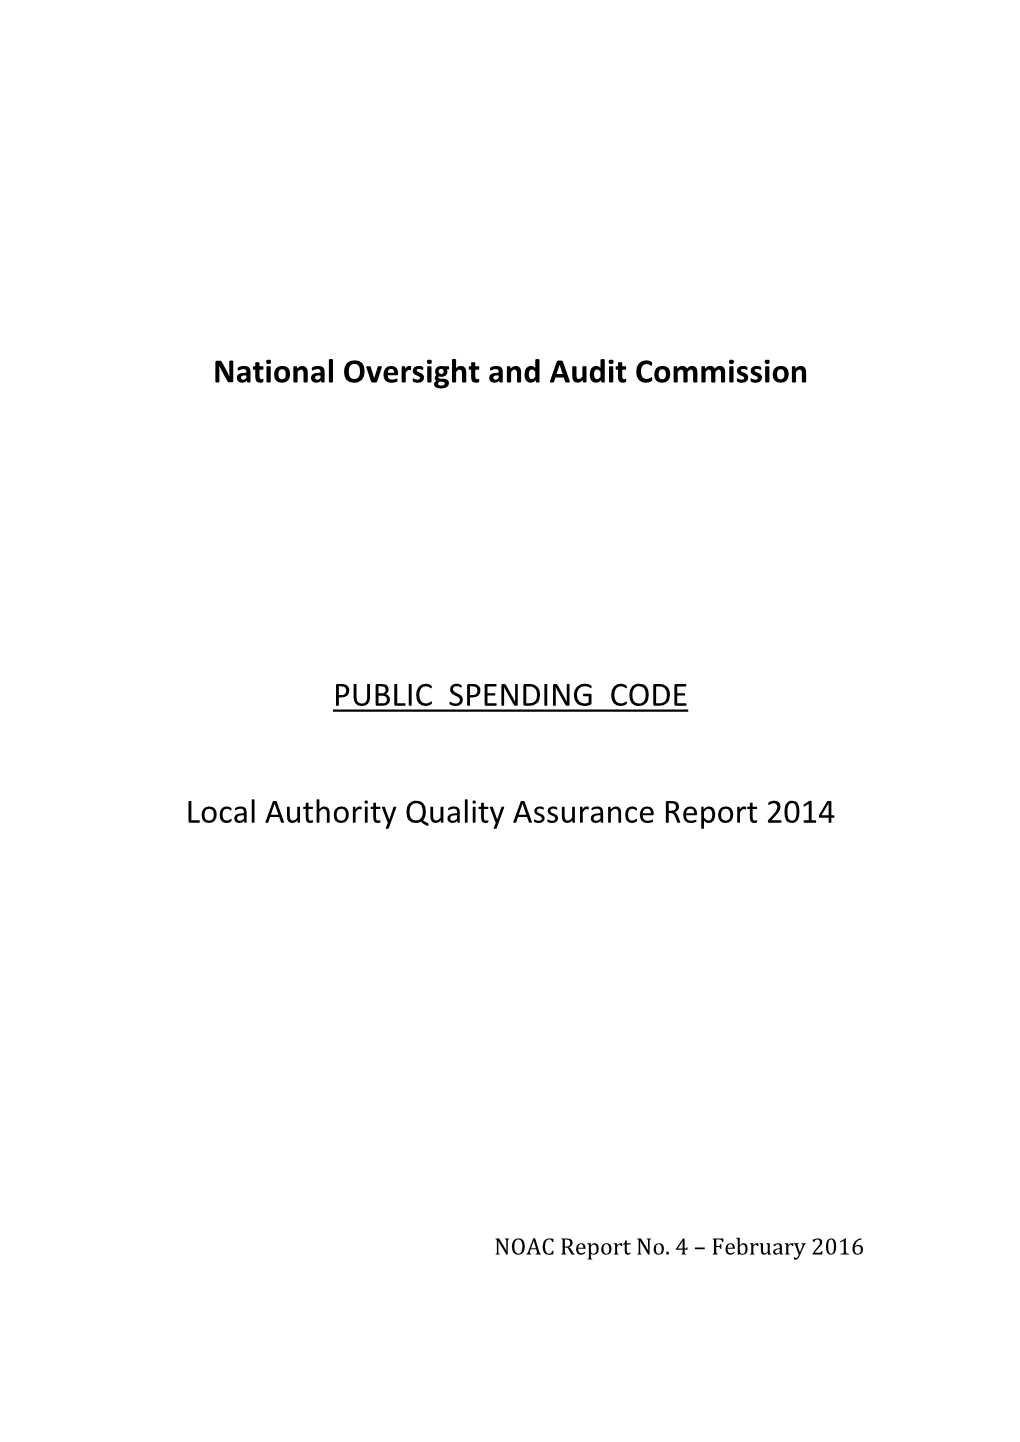 National Oversight and Audit Commission PUBLIC SPENDING